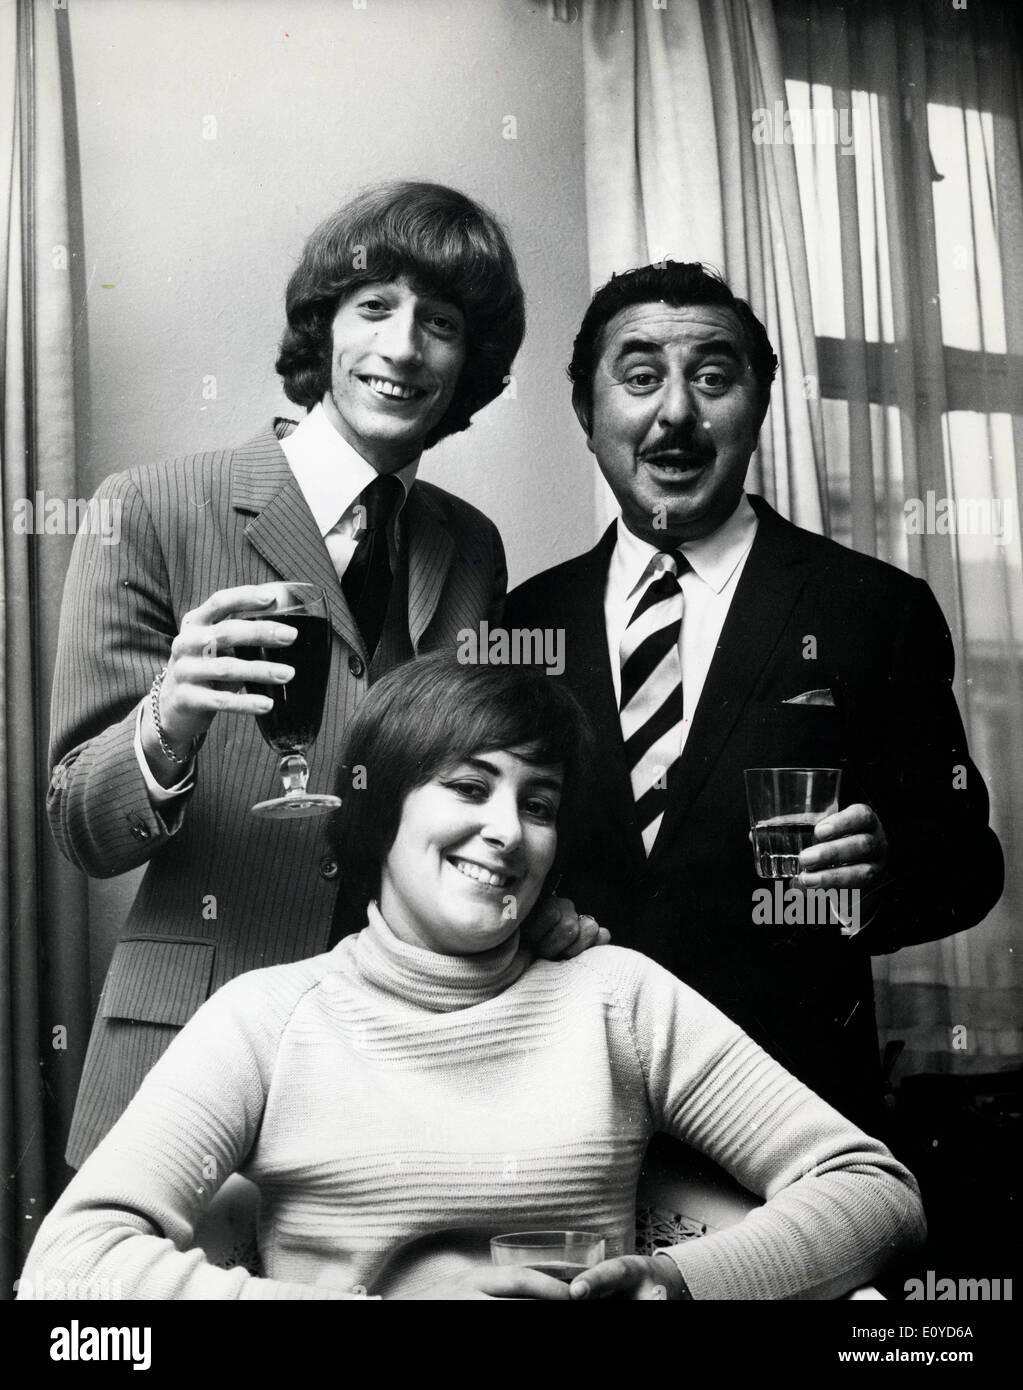 The Bee Gees Robin Gibb with wife and father Stock Photo